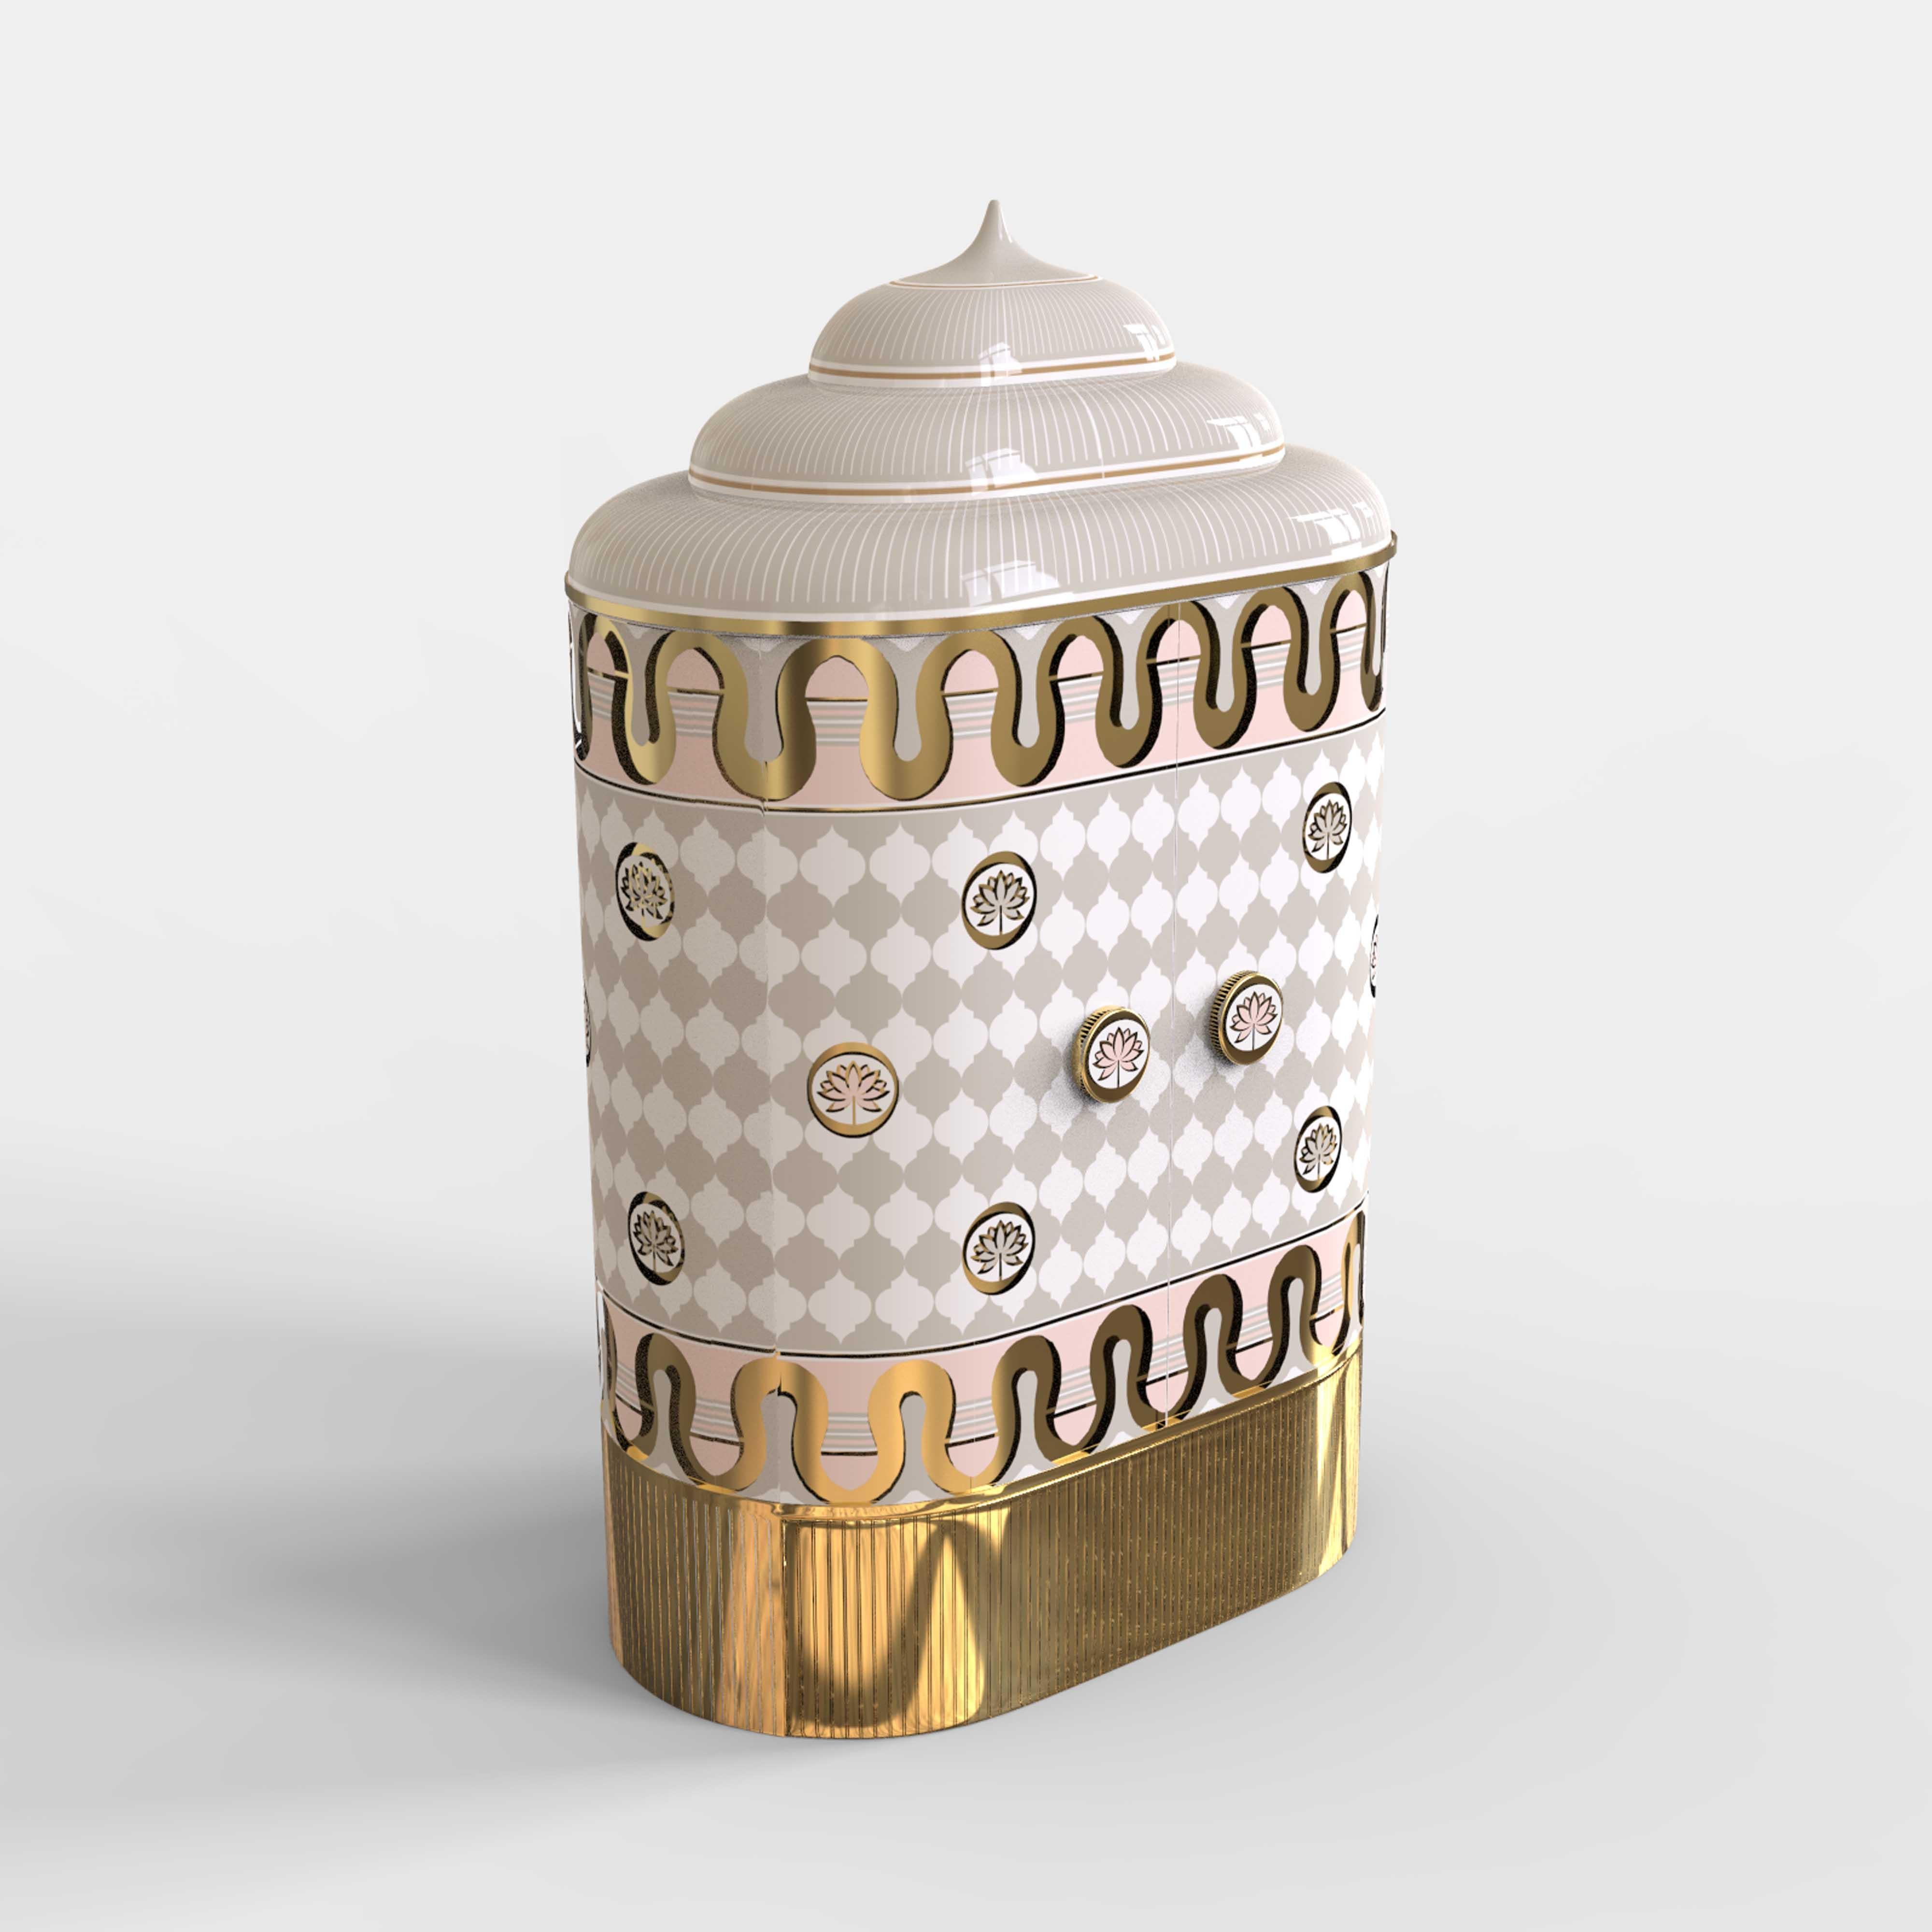 Lotus sanctum white and gold storage cabinet with brass inlay by Matteo Cibic is a versatile cabinet inspired by the purity of the lotus. Burnished brass walls and pillars within anticipate a glowing Revelation. Available in three colors.

Each